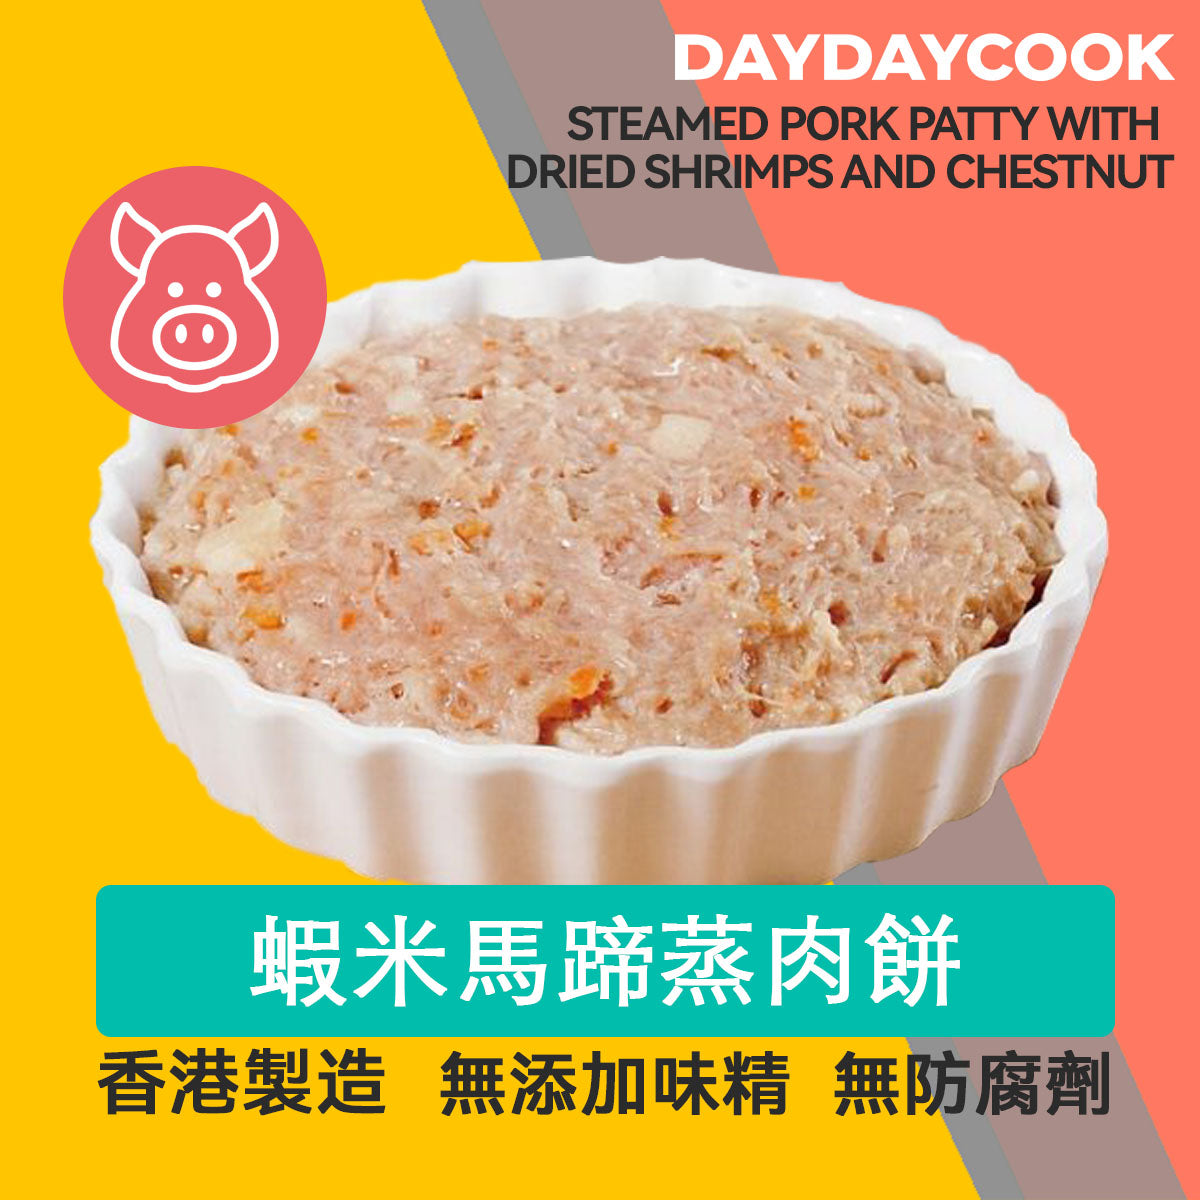 Steamed Pork Patty with Dried Shrimps and Chestnut